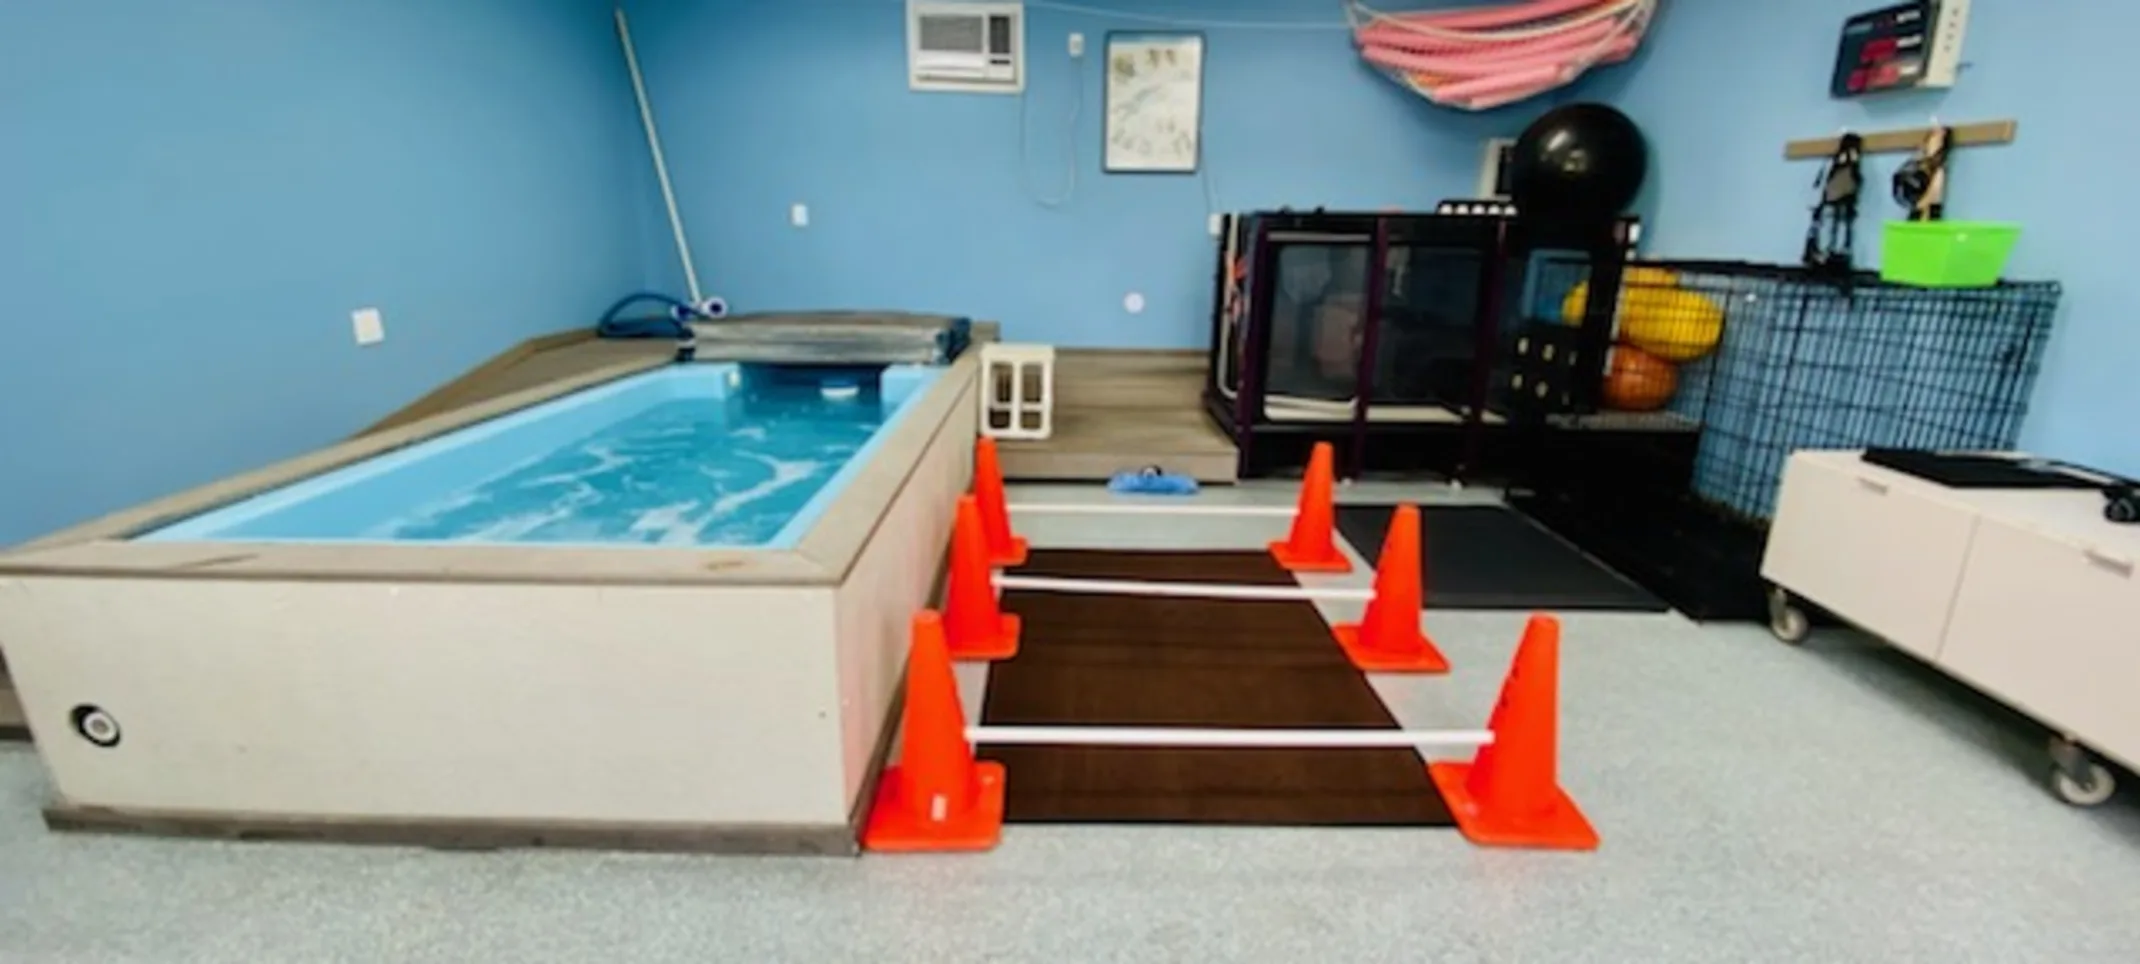 Hydrotherapy Station with pool